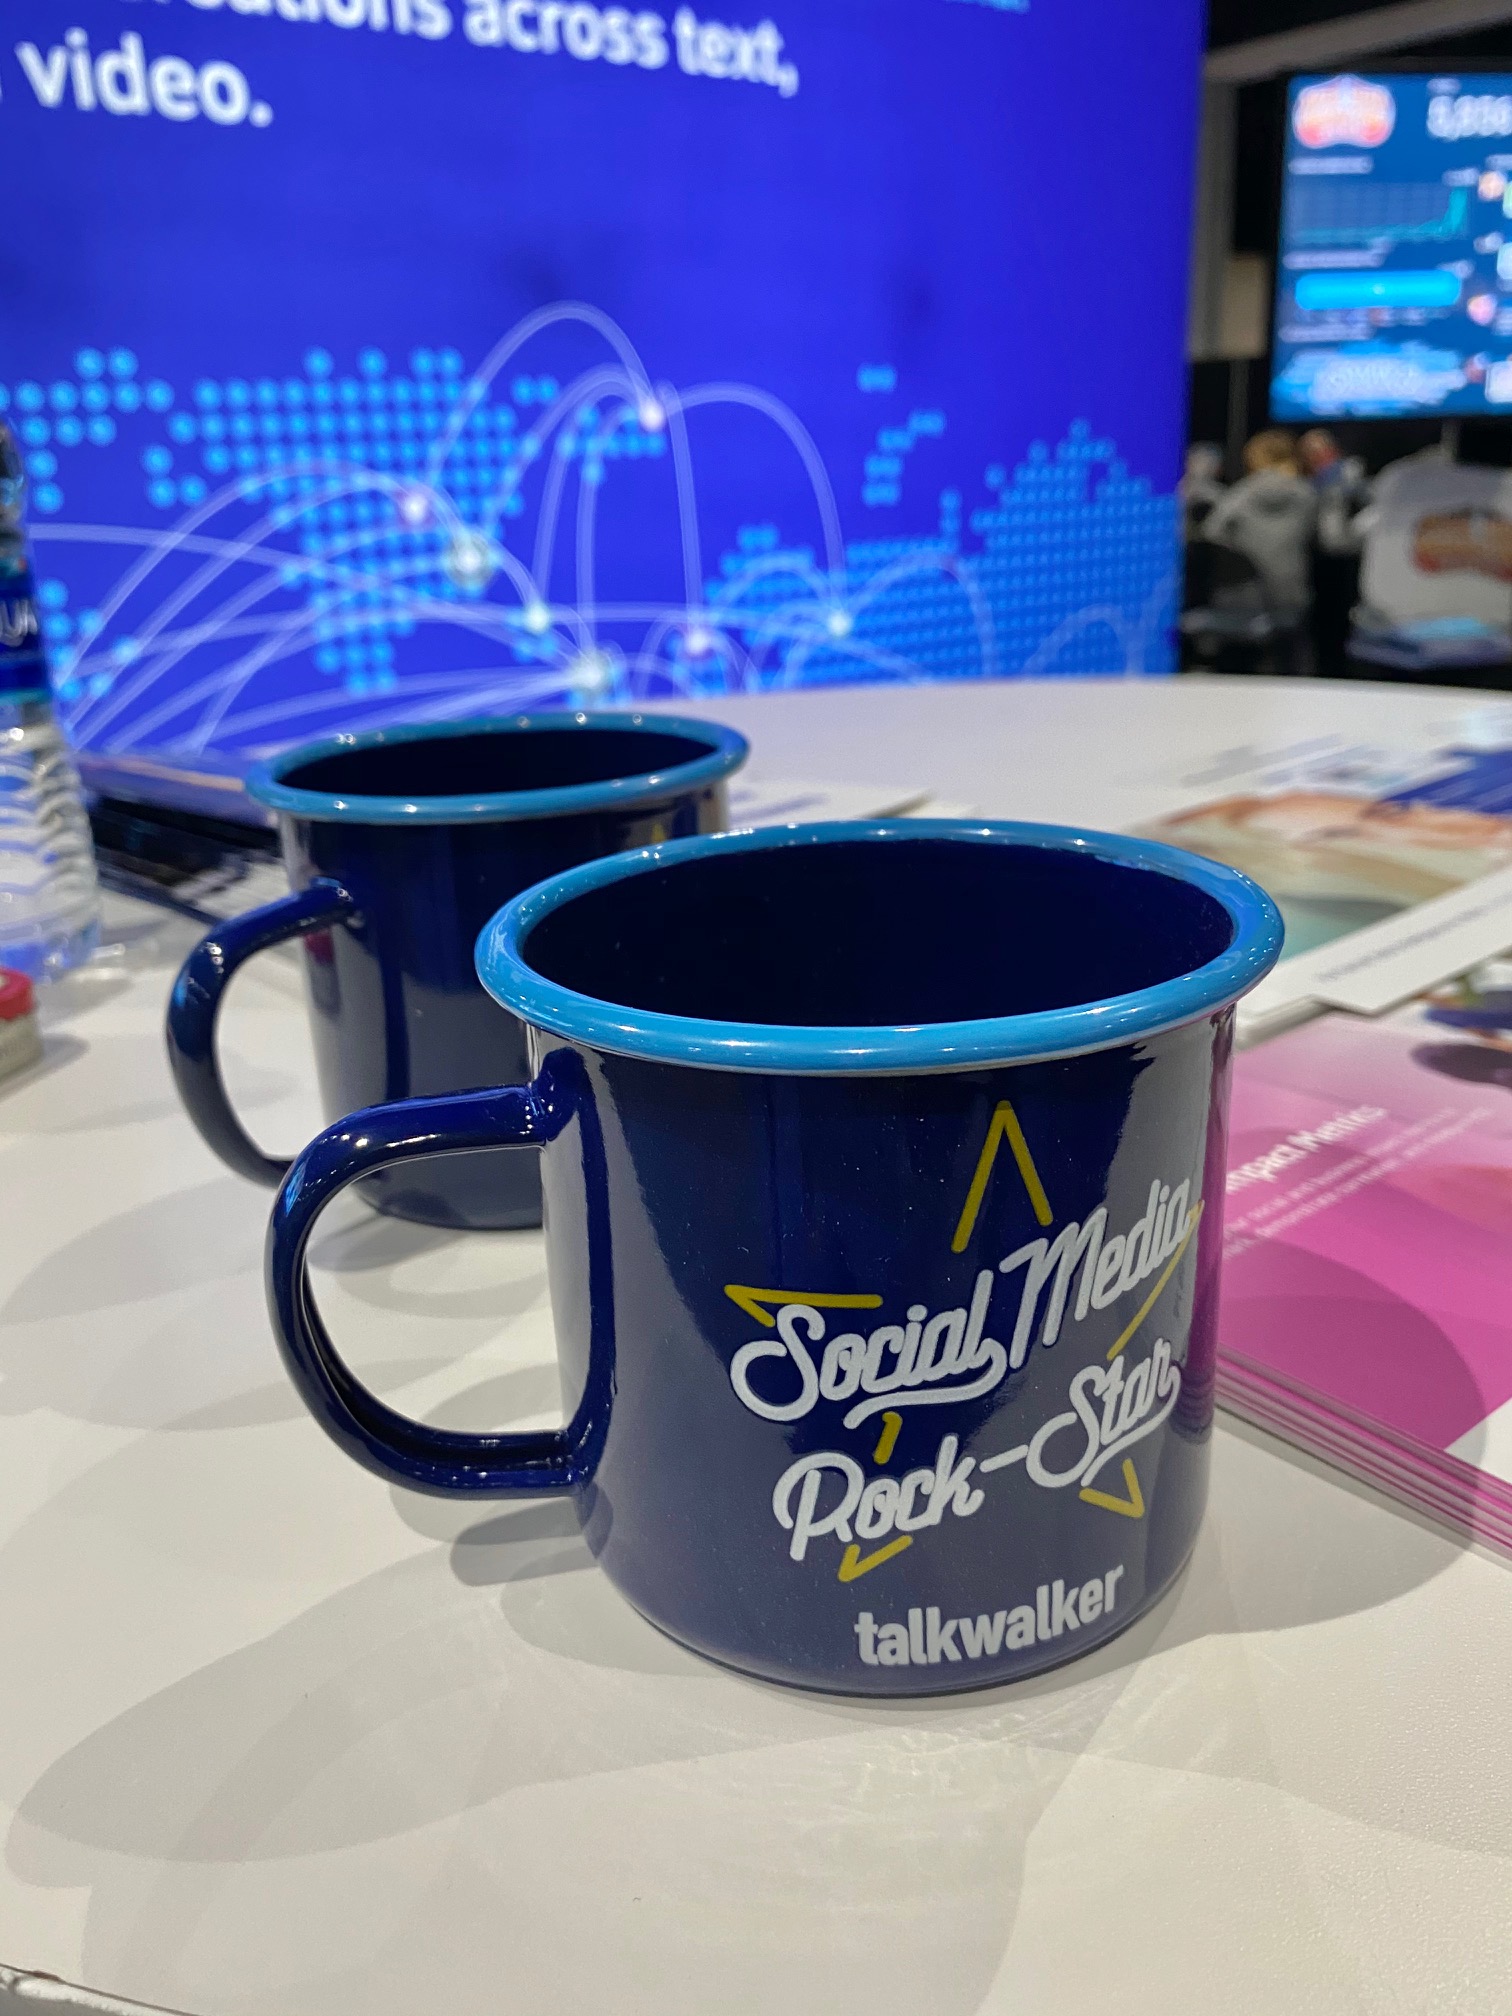 Case History: Promotional Product from Talkwalker. Enamel camp mug with custom message and logo. Ordered from Brand Spirit.